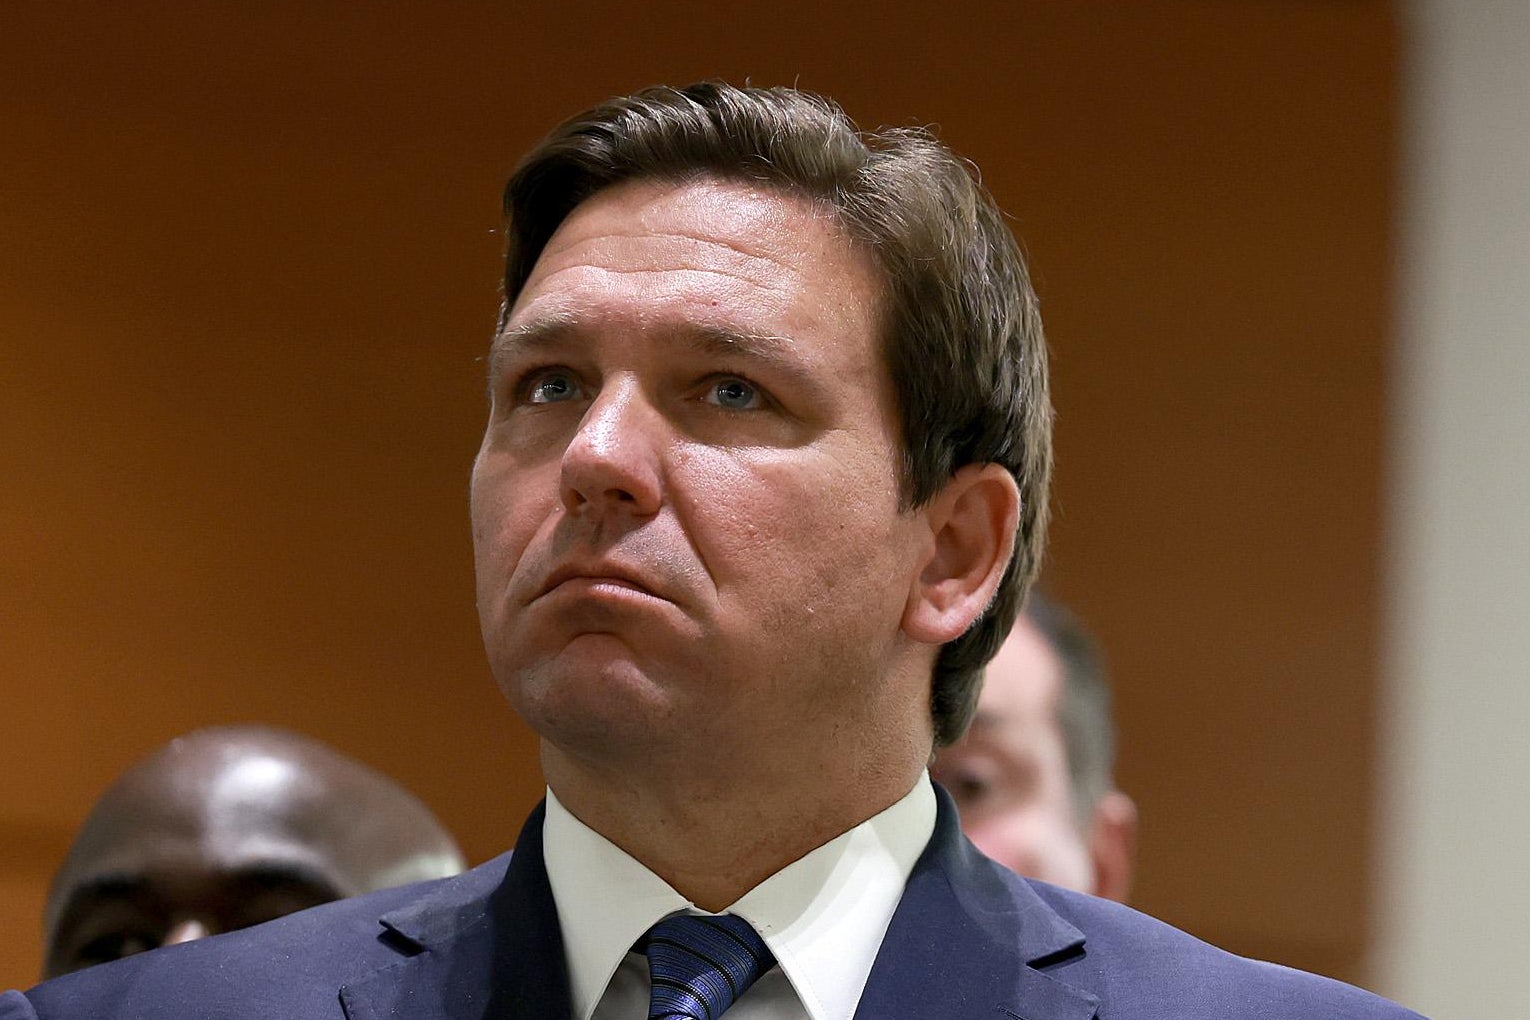 DeSantis in a suit, chin tilted up toward his right